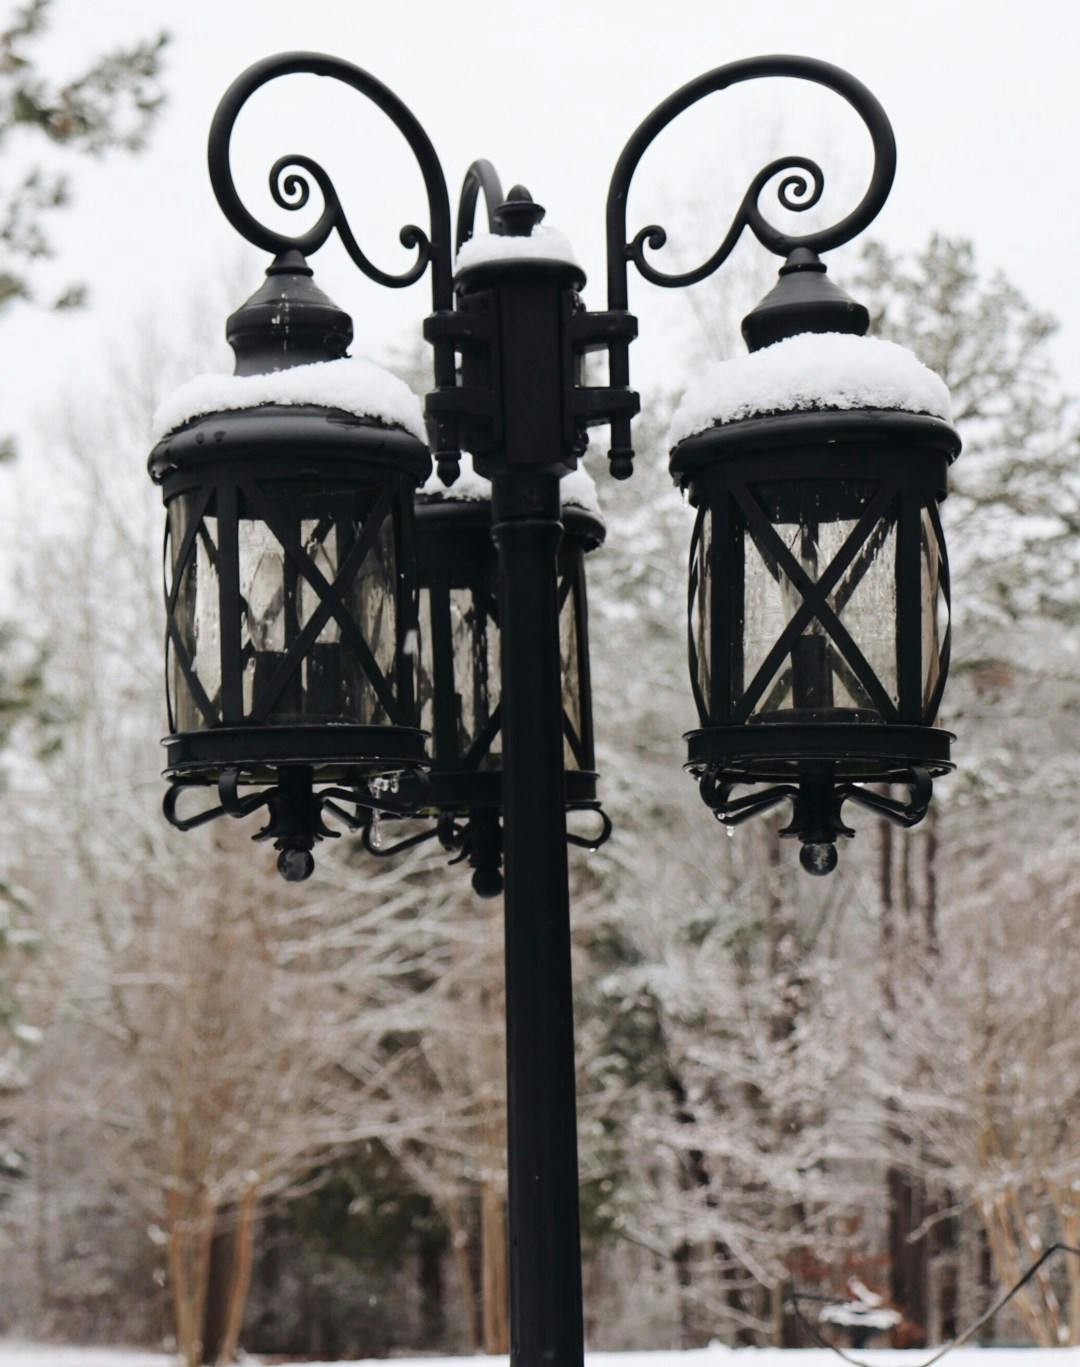 A snow covered light post